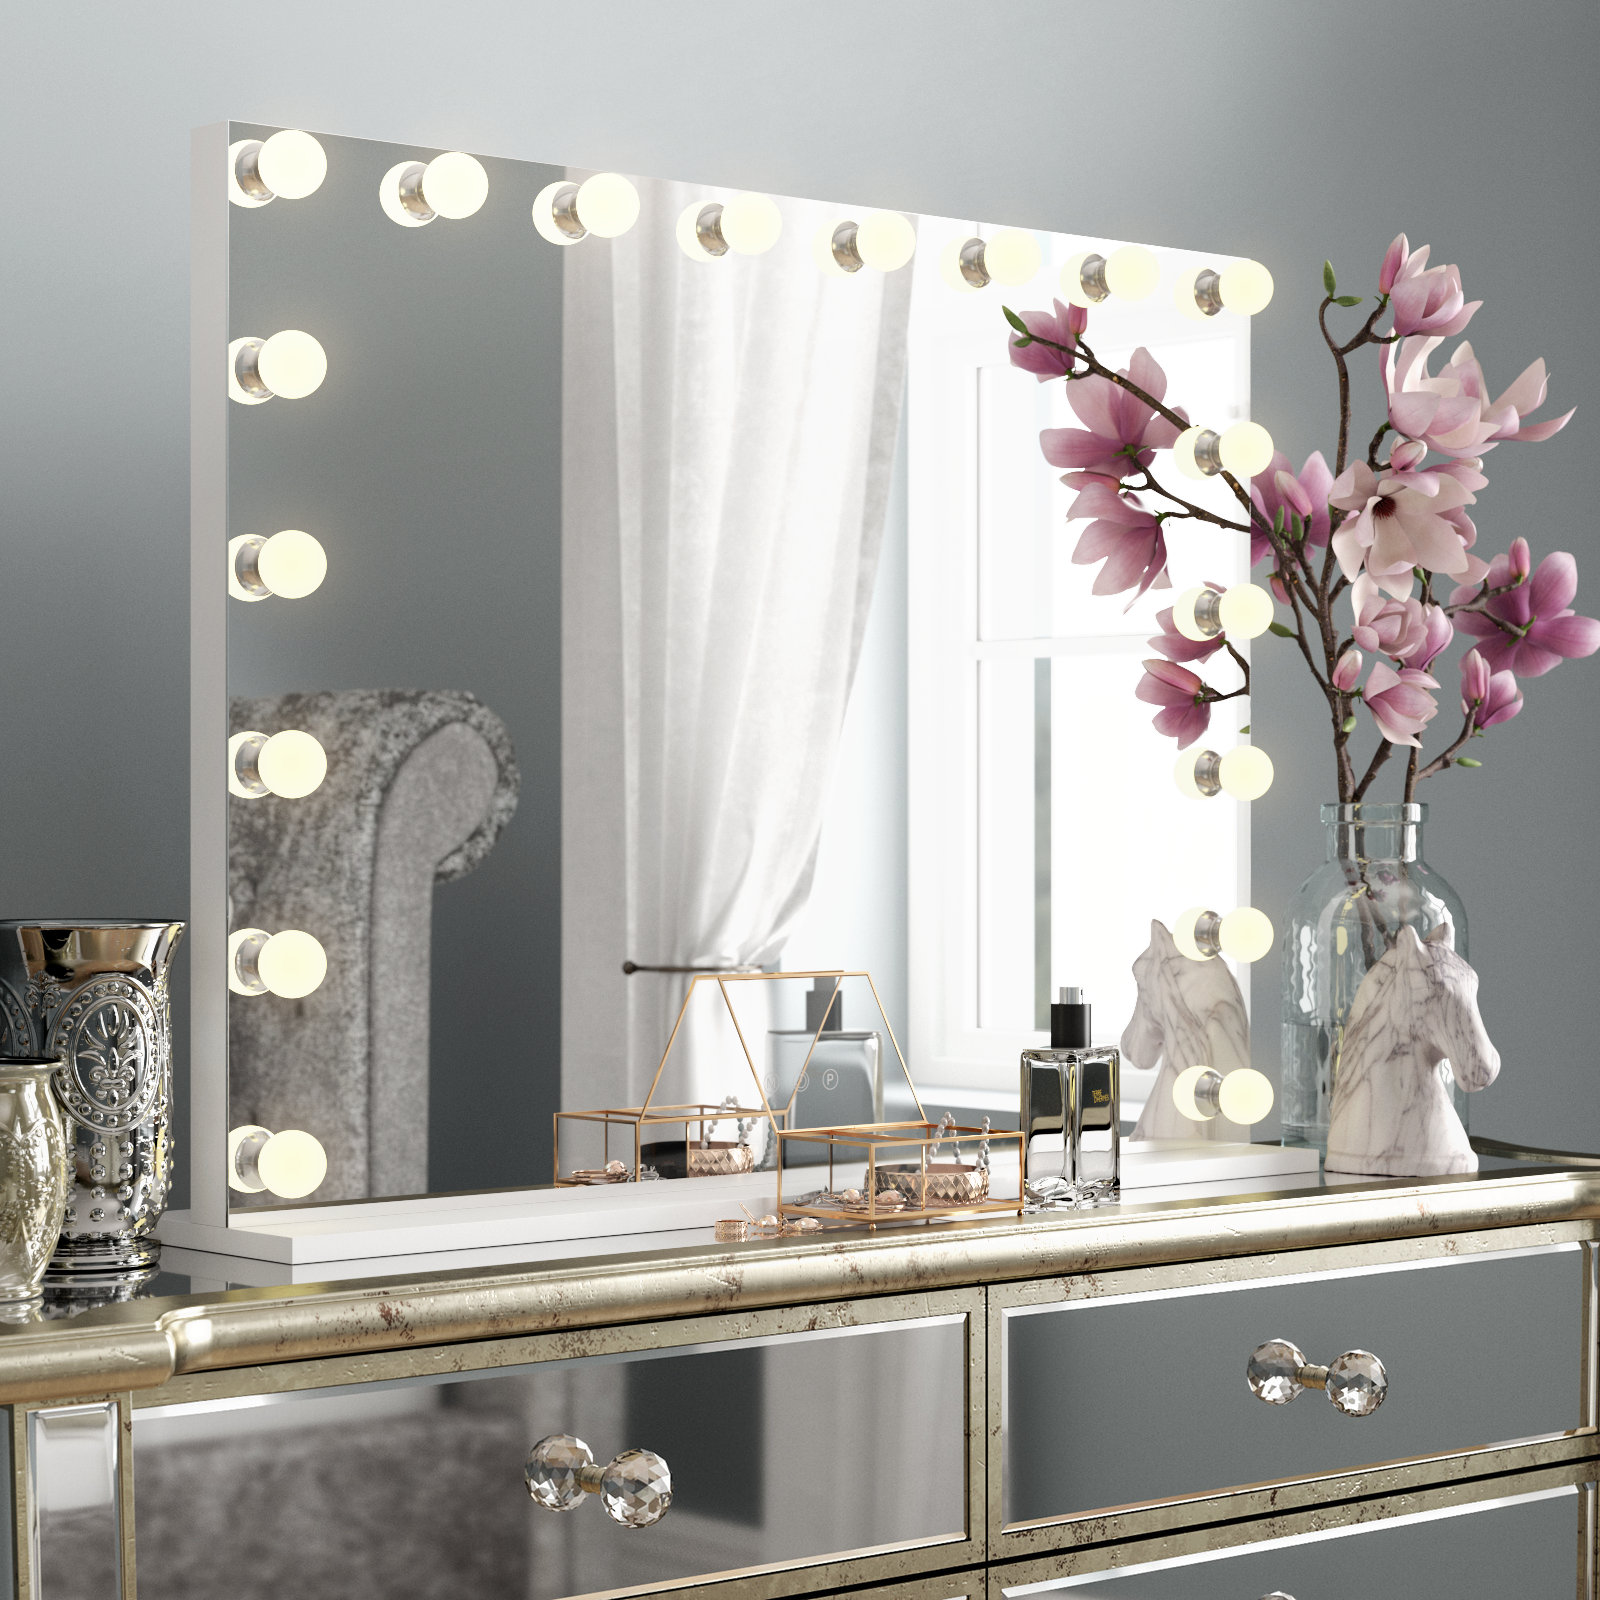 Kittridge Hollywood Dimmable Lighted Makeup/Shaving Mirror Ebern Designs Size: 23.6 H x 31.5 W x 6.3 D